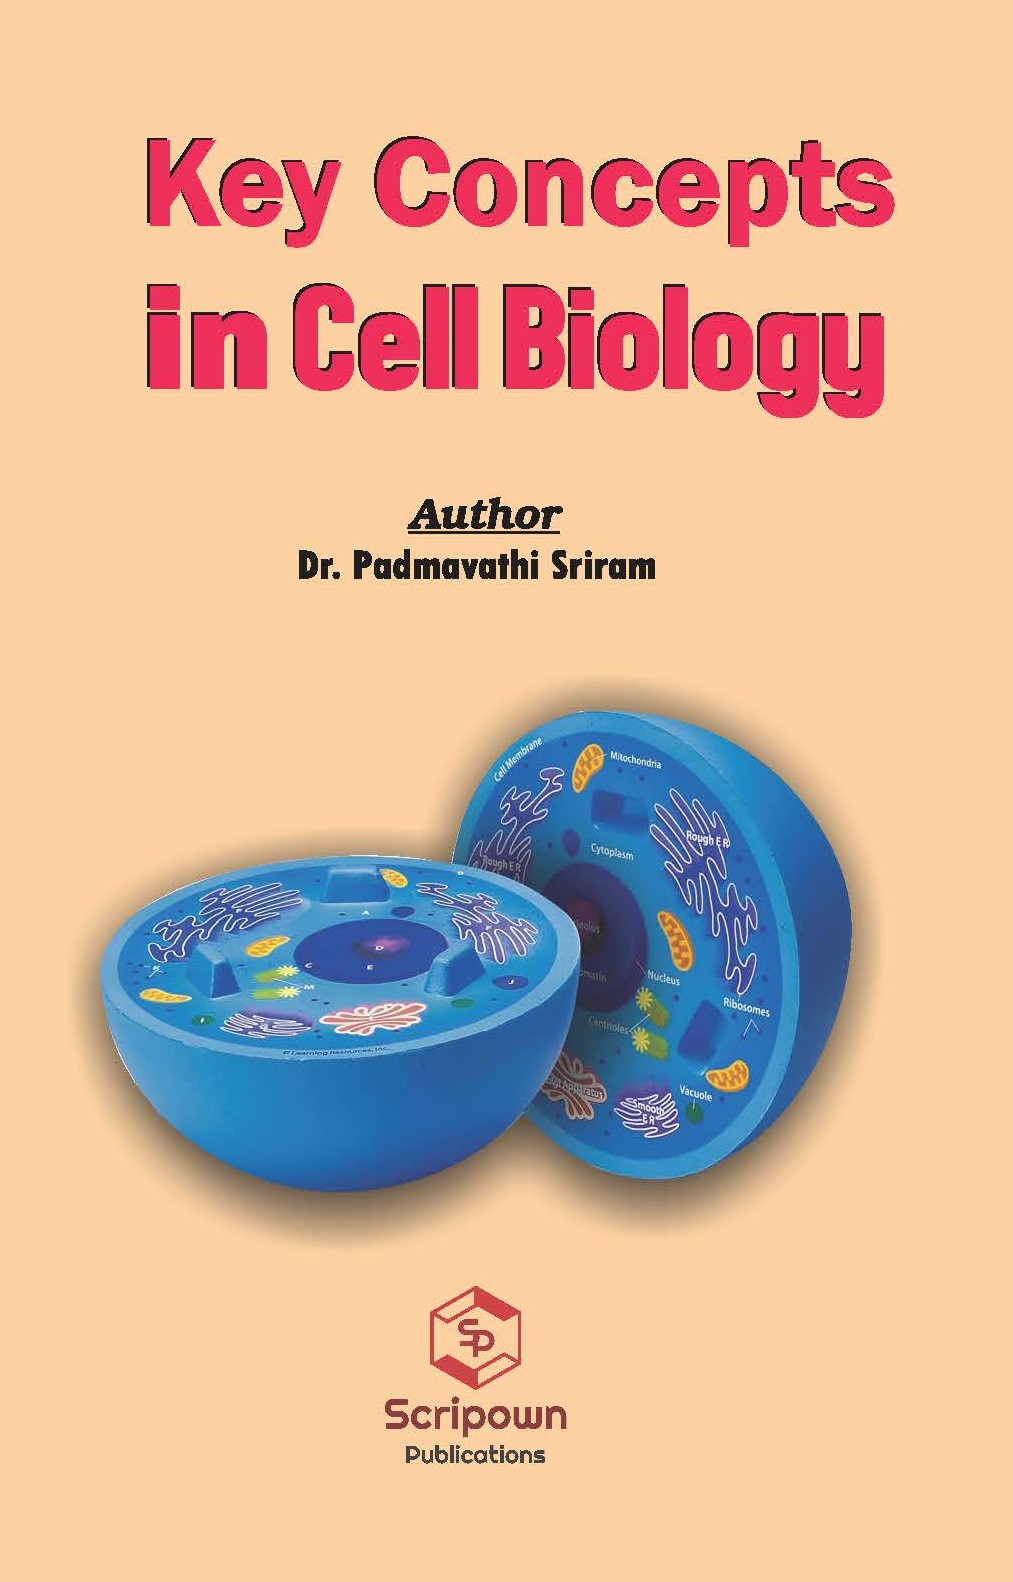 Key Concepts in Cell Biology